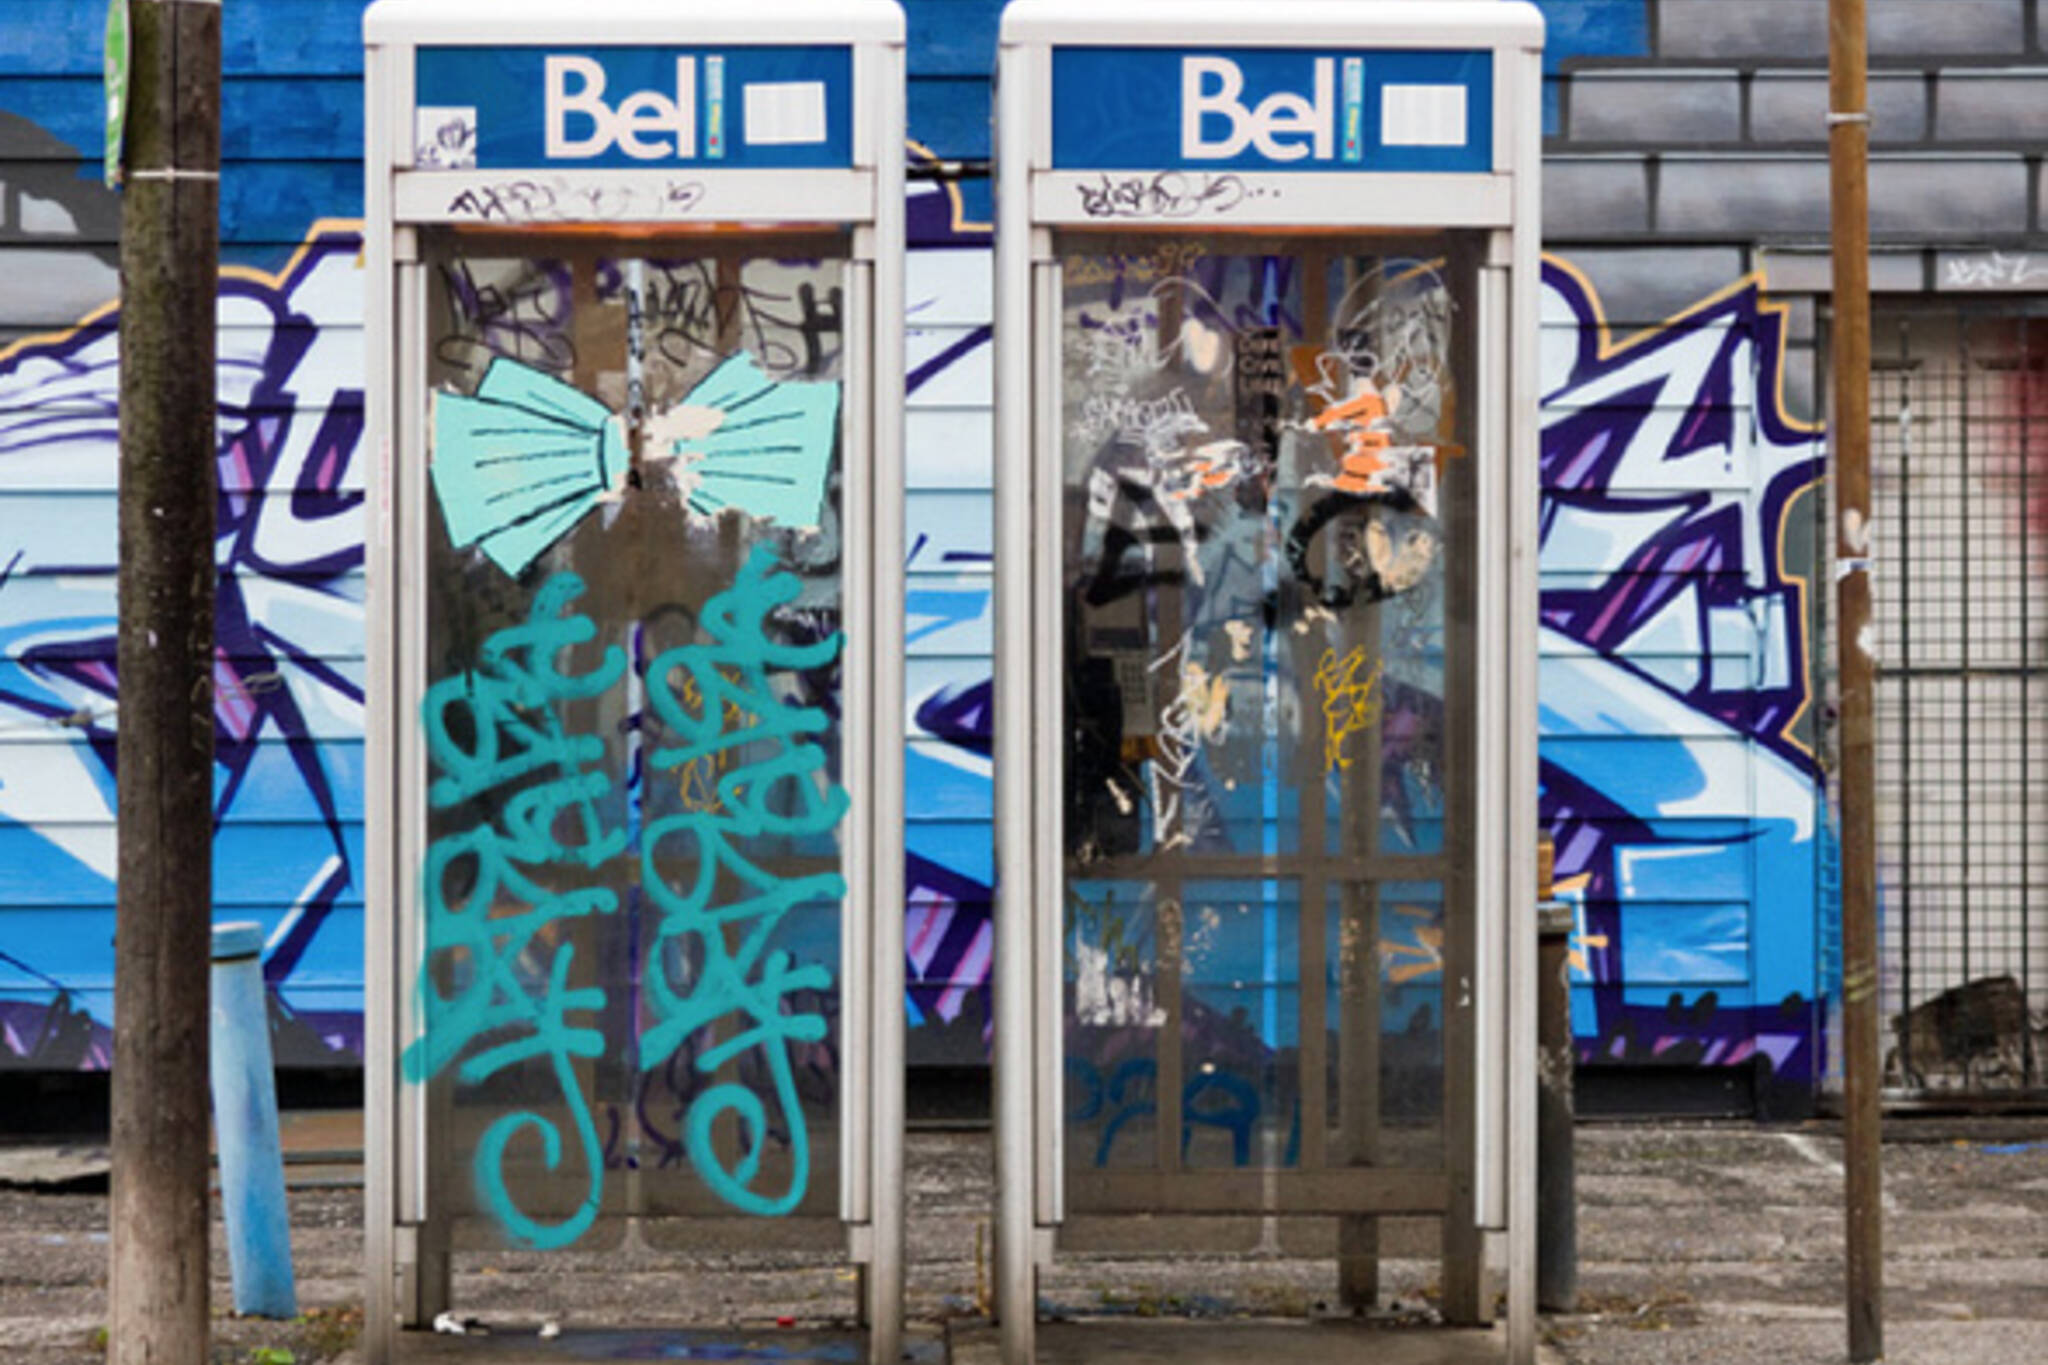 Bell Phone booth